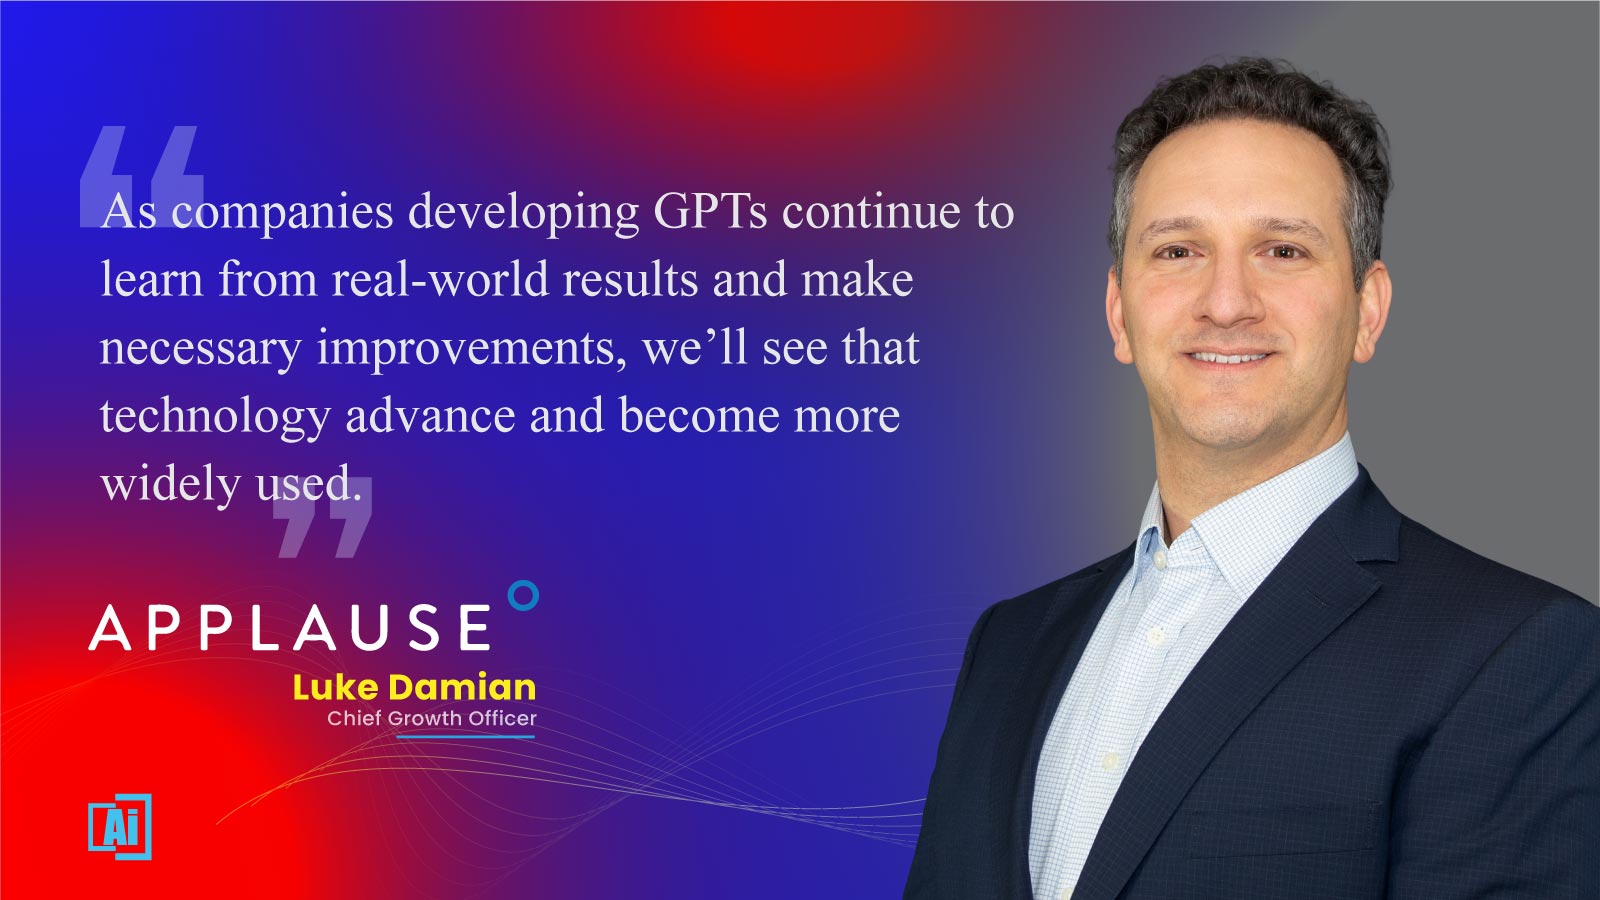 Luke Damian, Chief Growth Officer for Applause